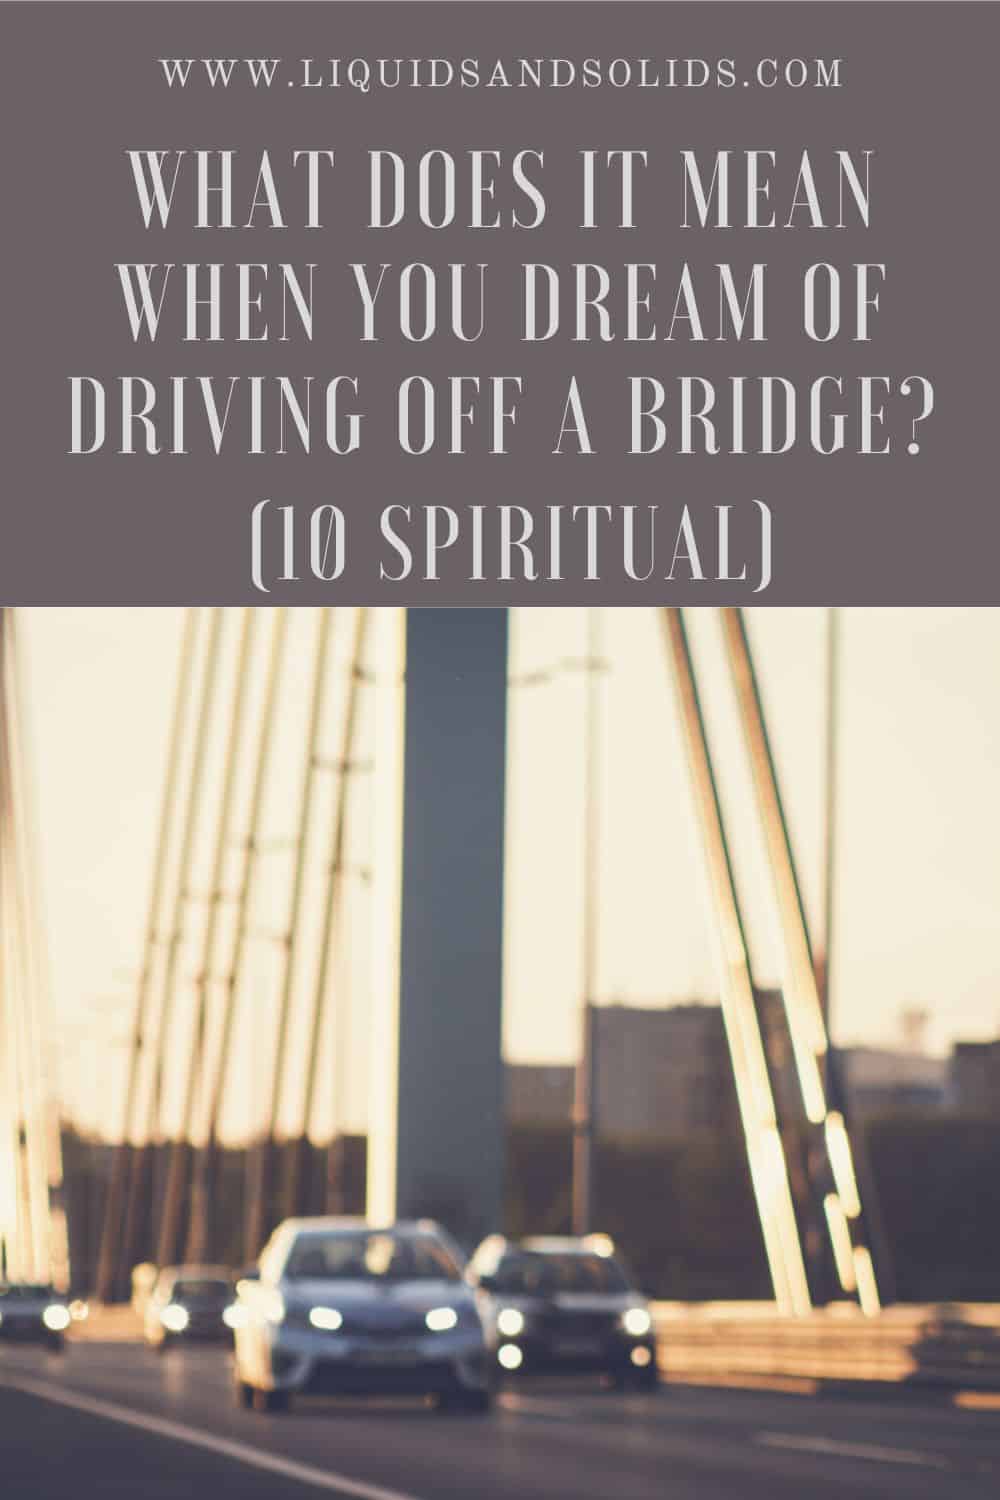 What Does It Mean When You Dream Of Driving Off A Bridge (10 Spiritual)